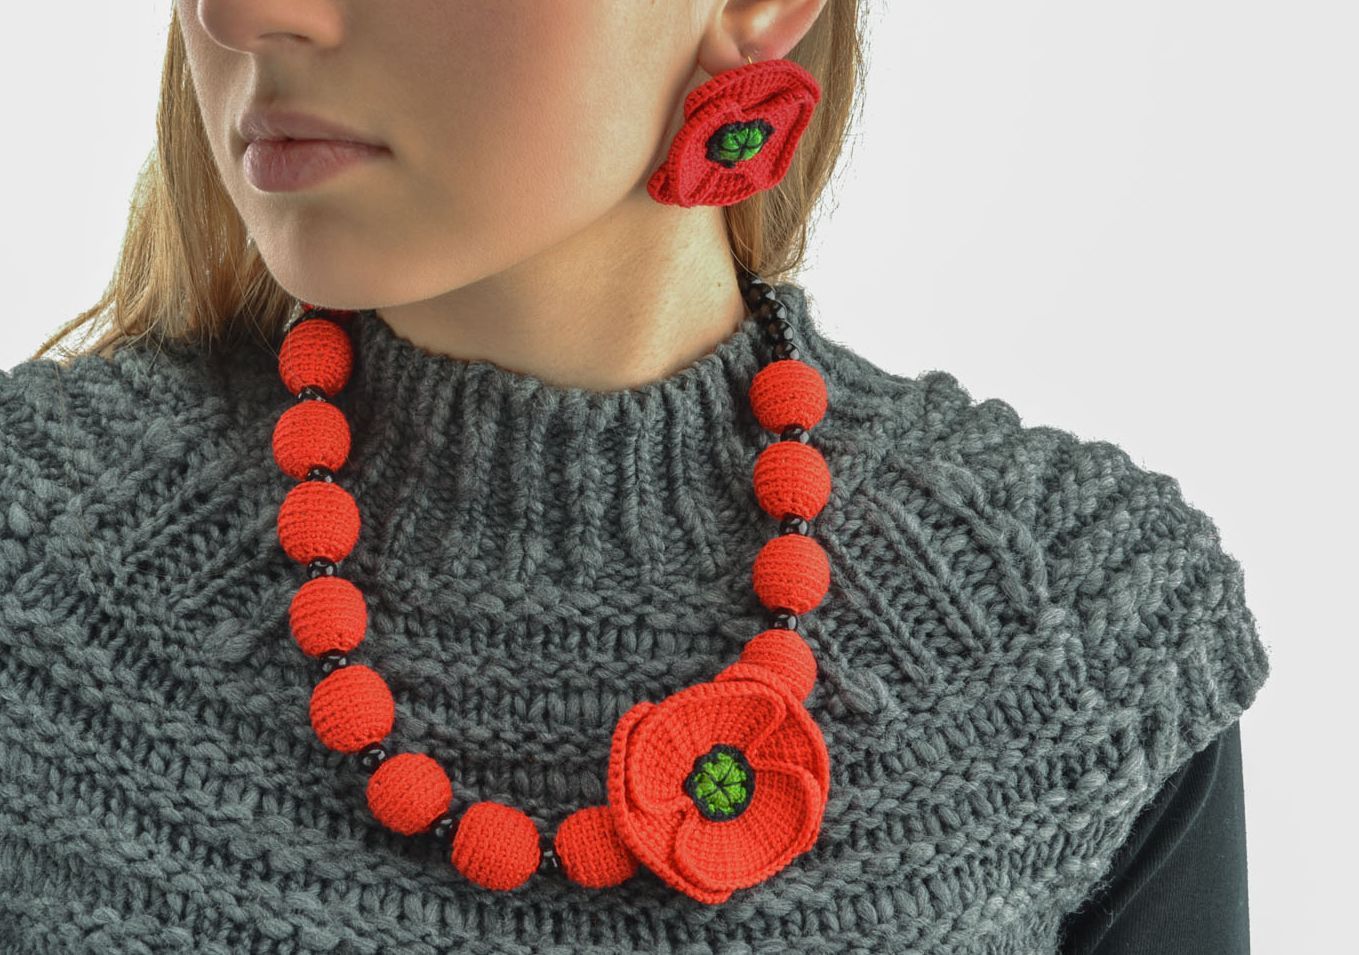 Crochet bead necklace and earrings photo 1